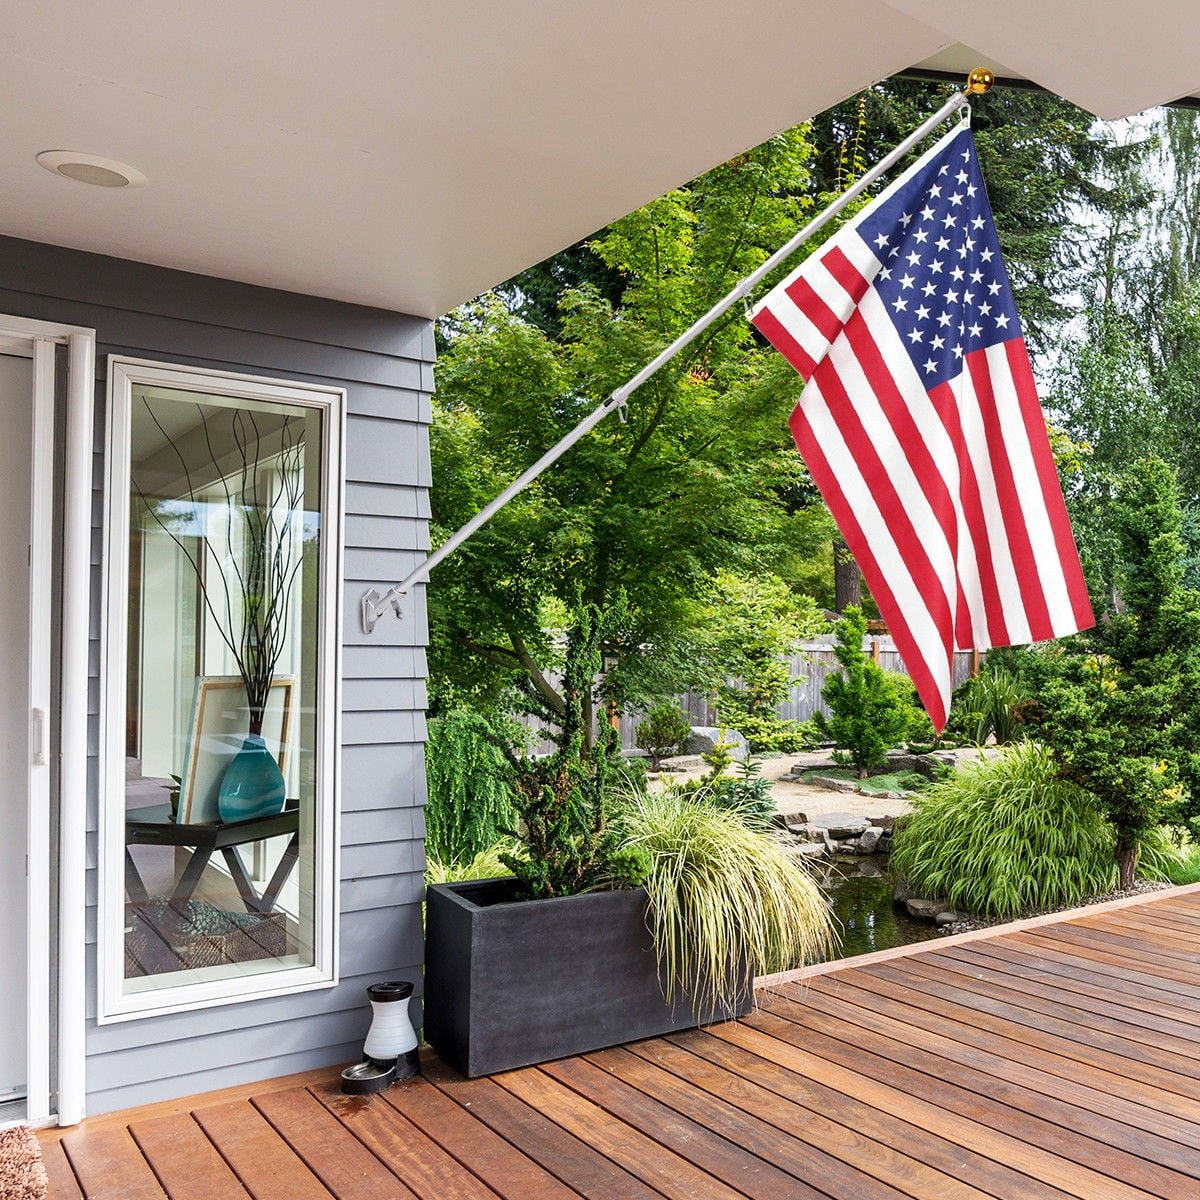 5' FT WOODEN FLAG POLE KIT WITH BRACKET & 3X5 USA AMERICAN FLAG 